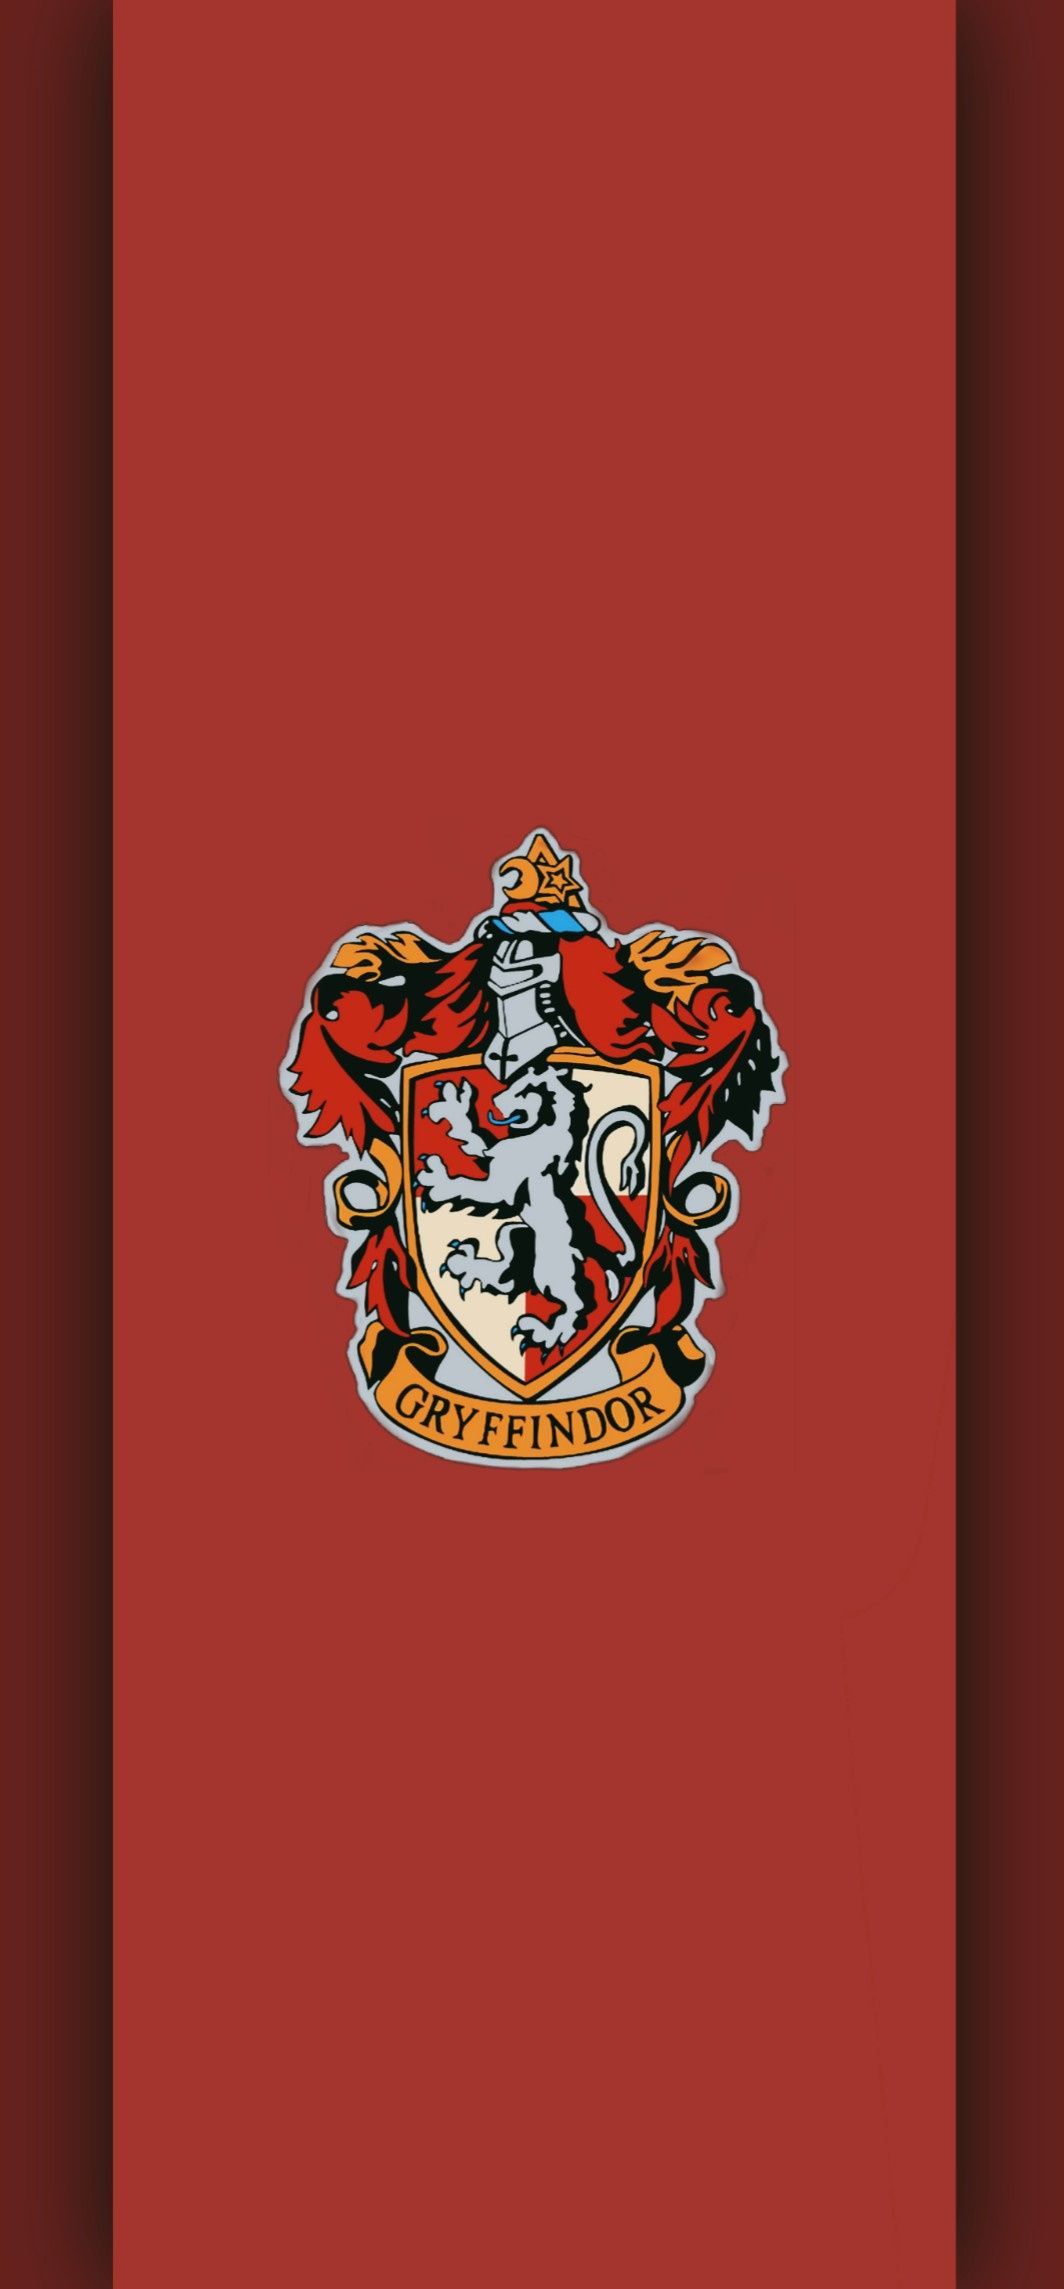 The harry potter logo on a red background - Gryffindor